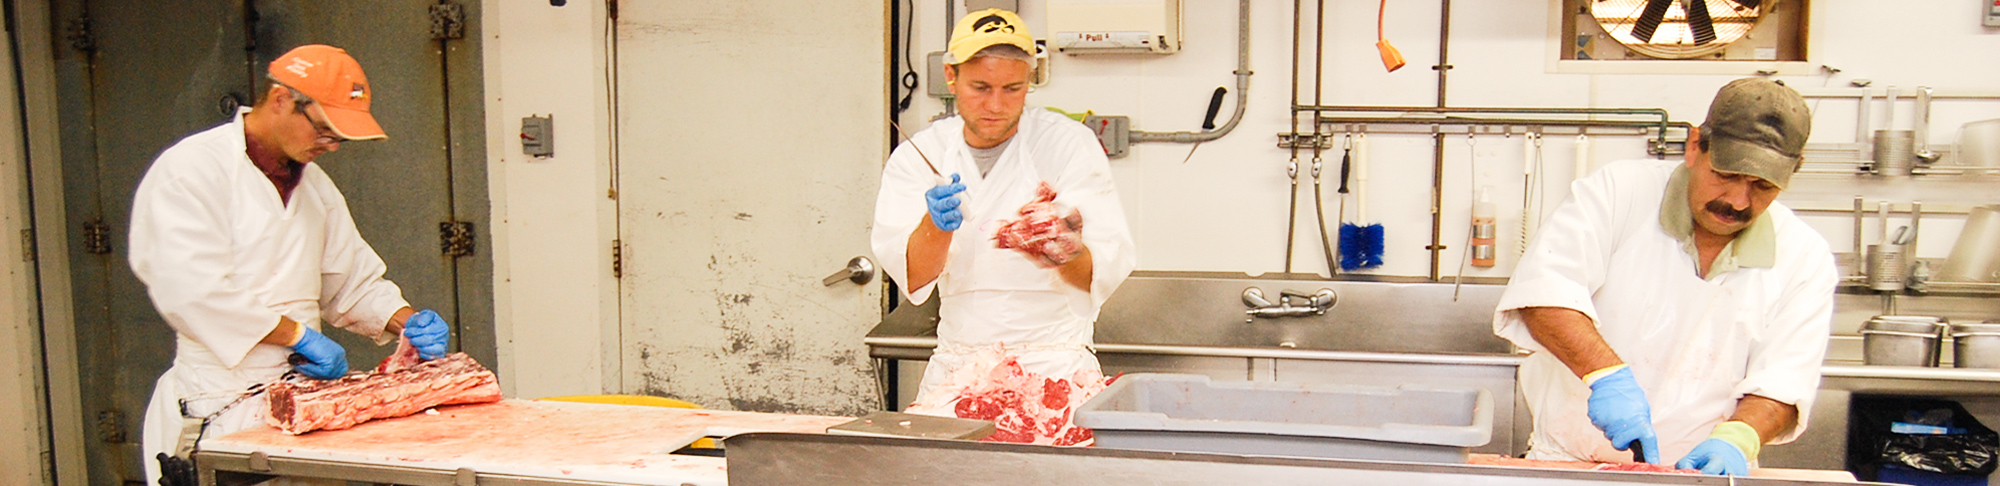 butchering meat for a producer